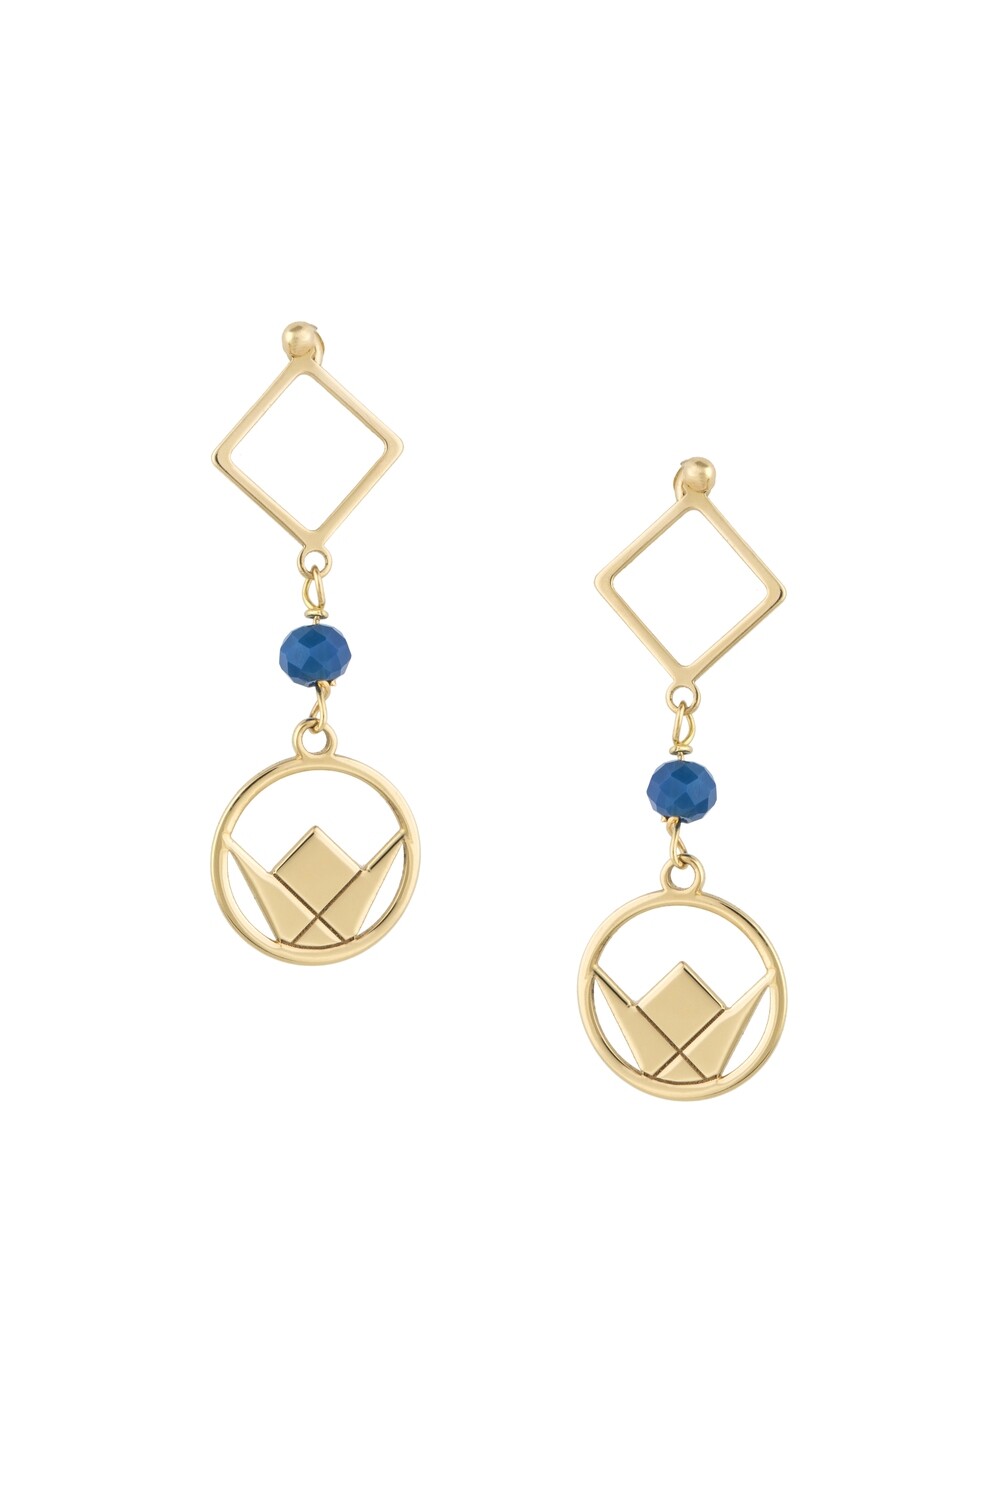 Emblem Gold Earrings with Colored stones